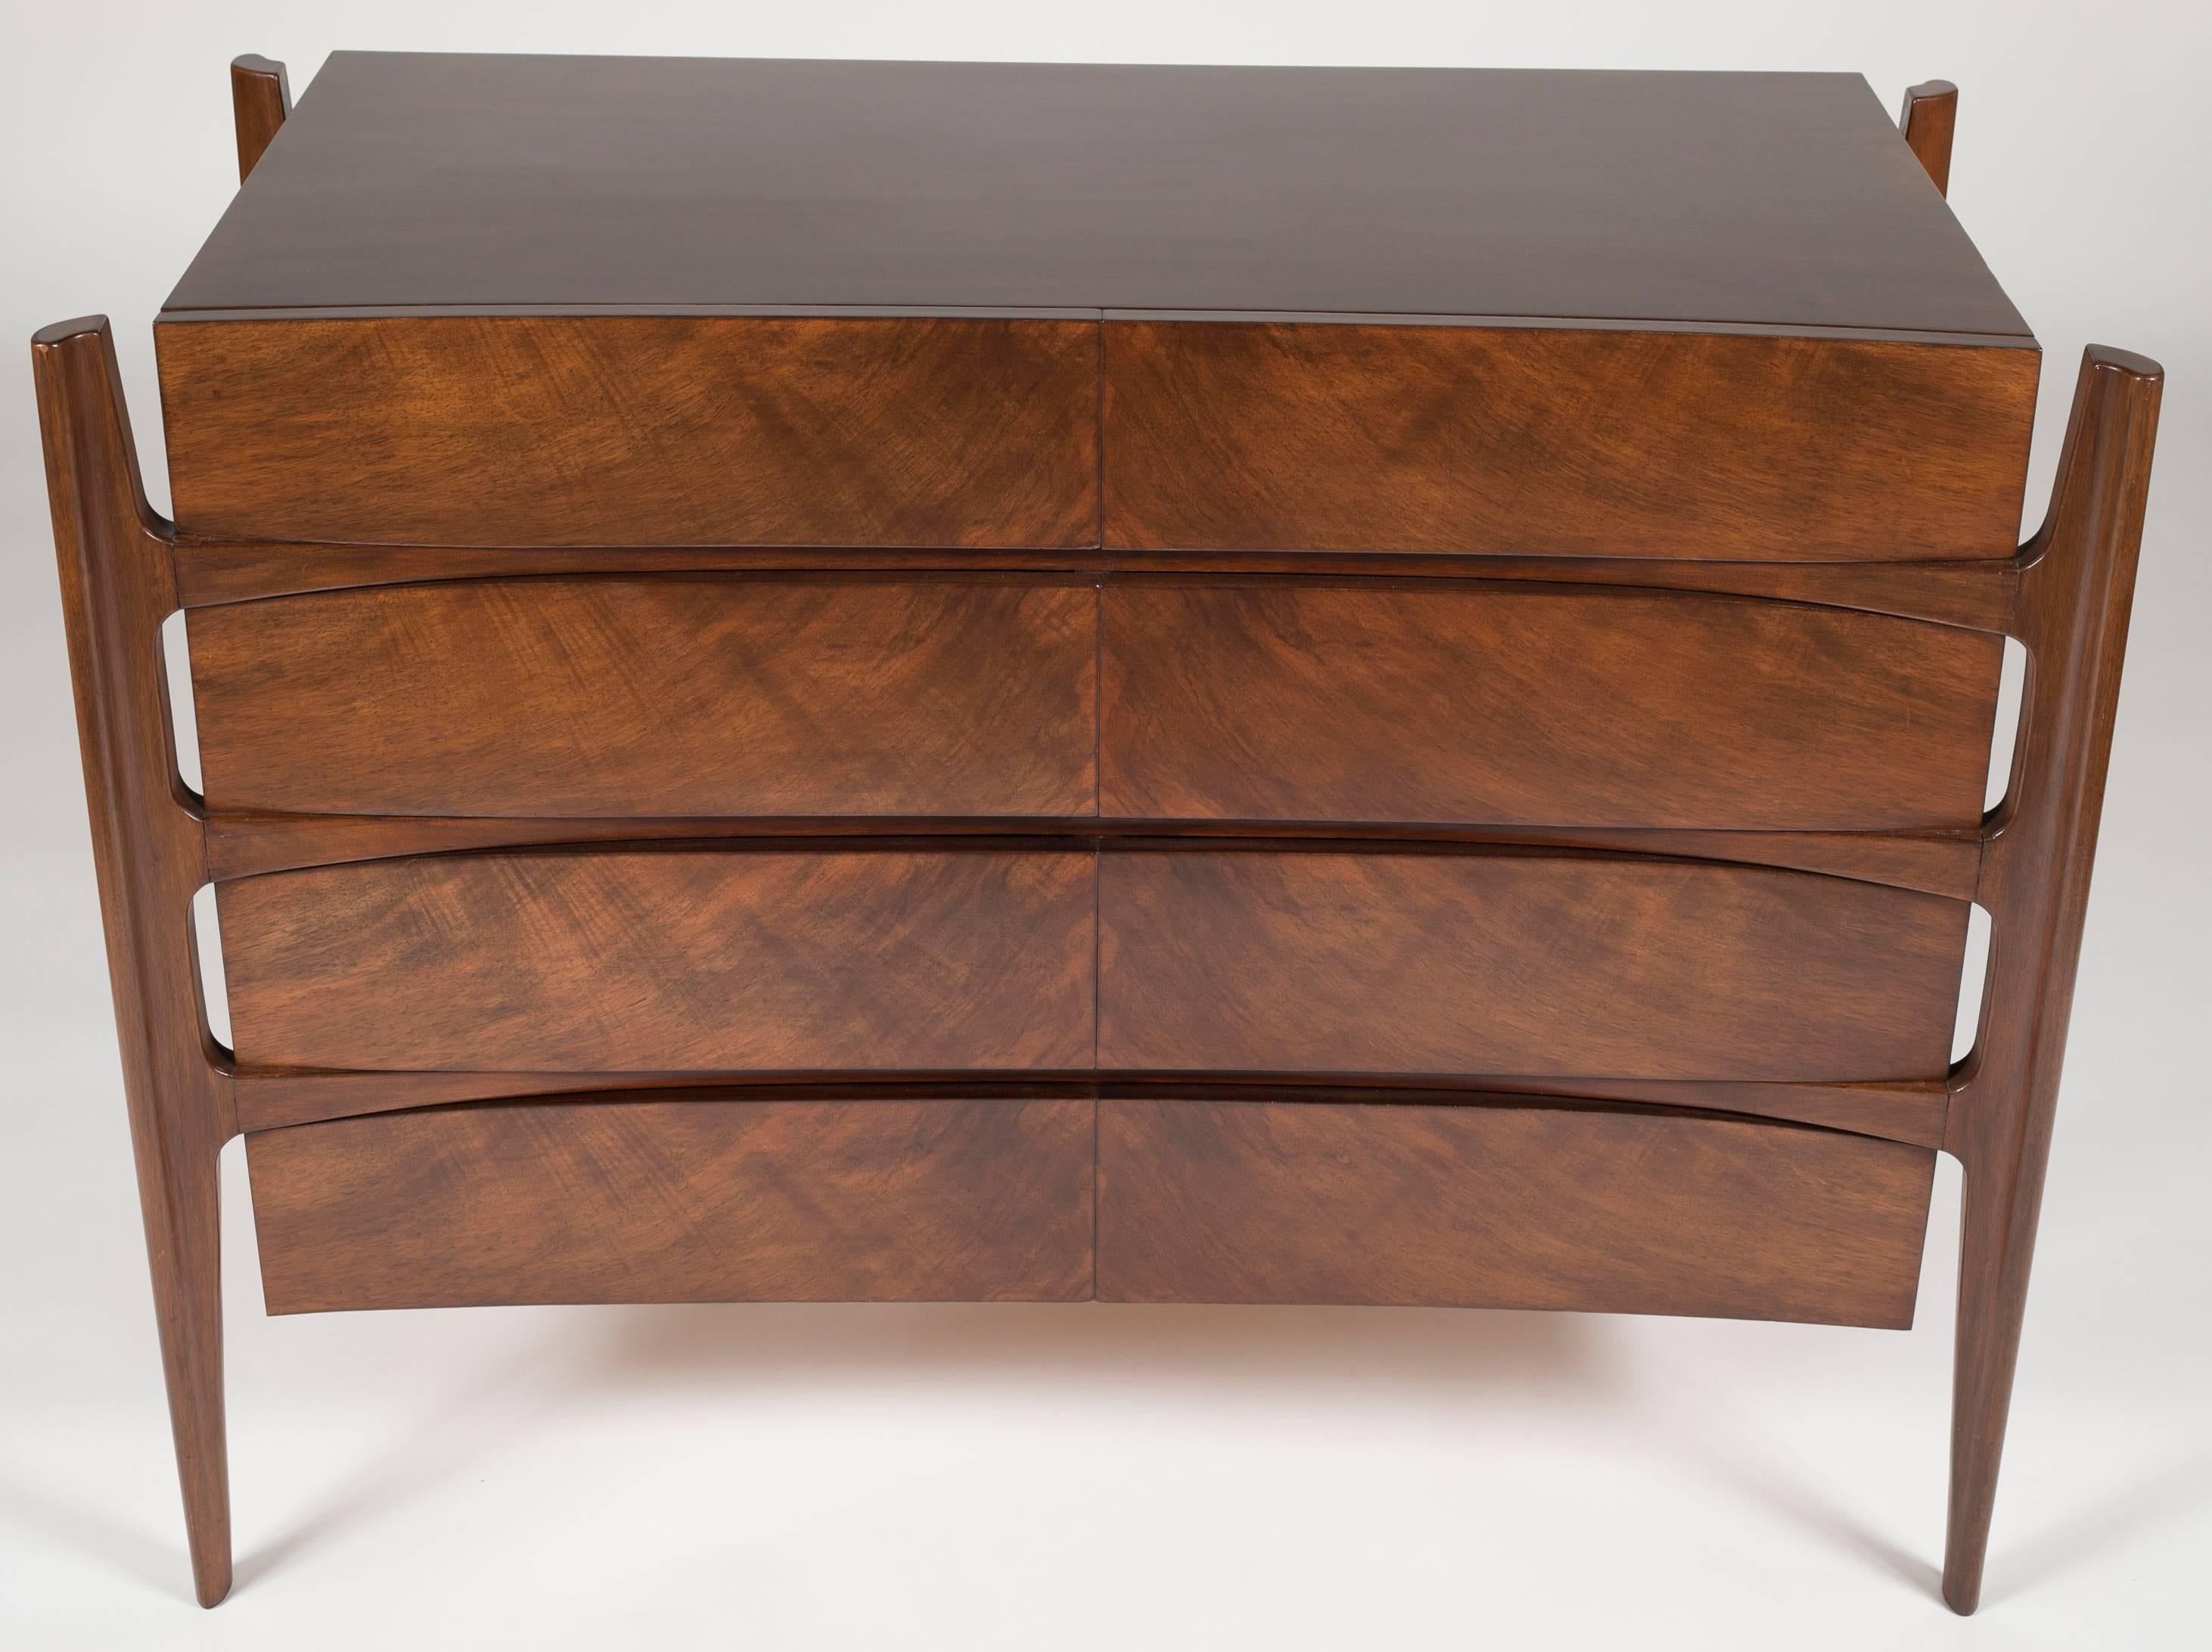 A walnut chest with eight drawers and finished back. The chest was designed by William Hinn for Urban Furniture